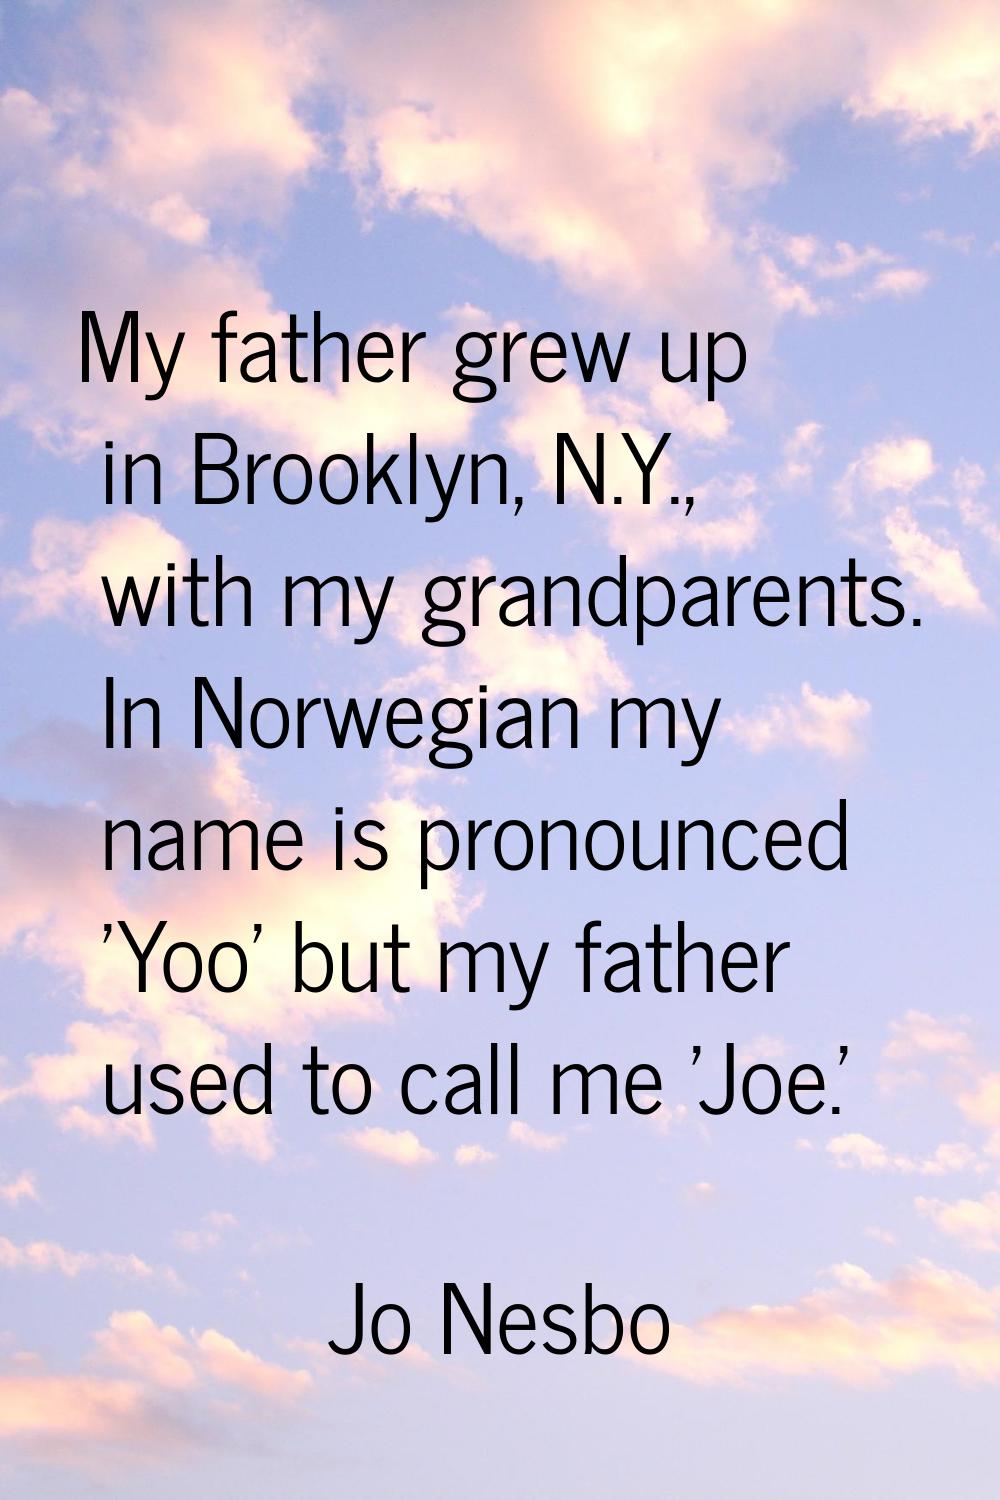 My father grew up in Brooklyn, N.Y., with my grandparents. In Norwegian my name is pronounced 'Yoo'